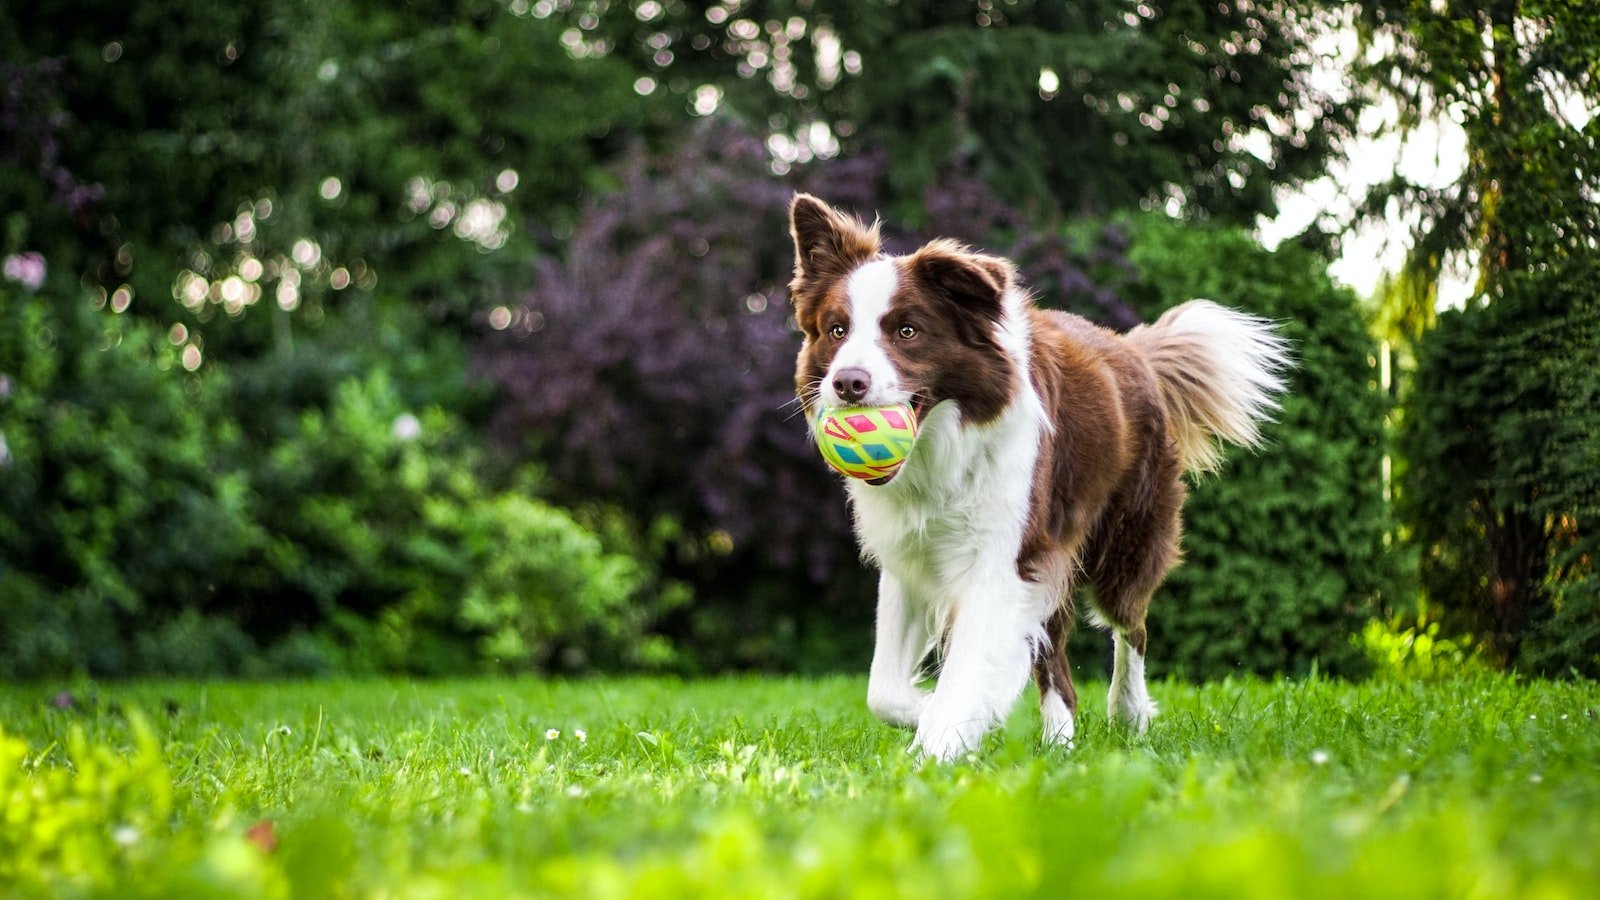 Dog Training for Multi-Step Tricks: The “Obstacle Course”